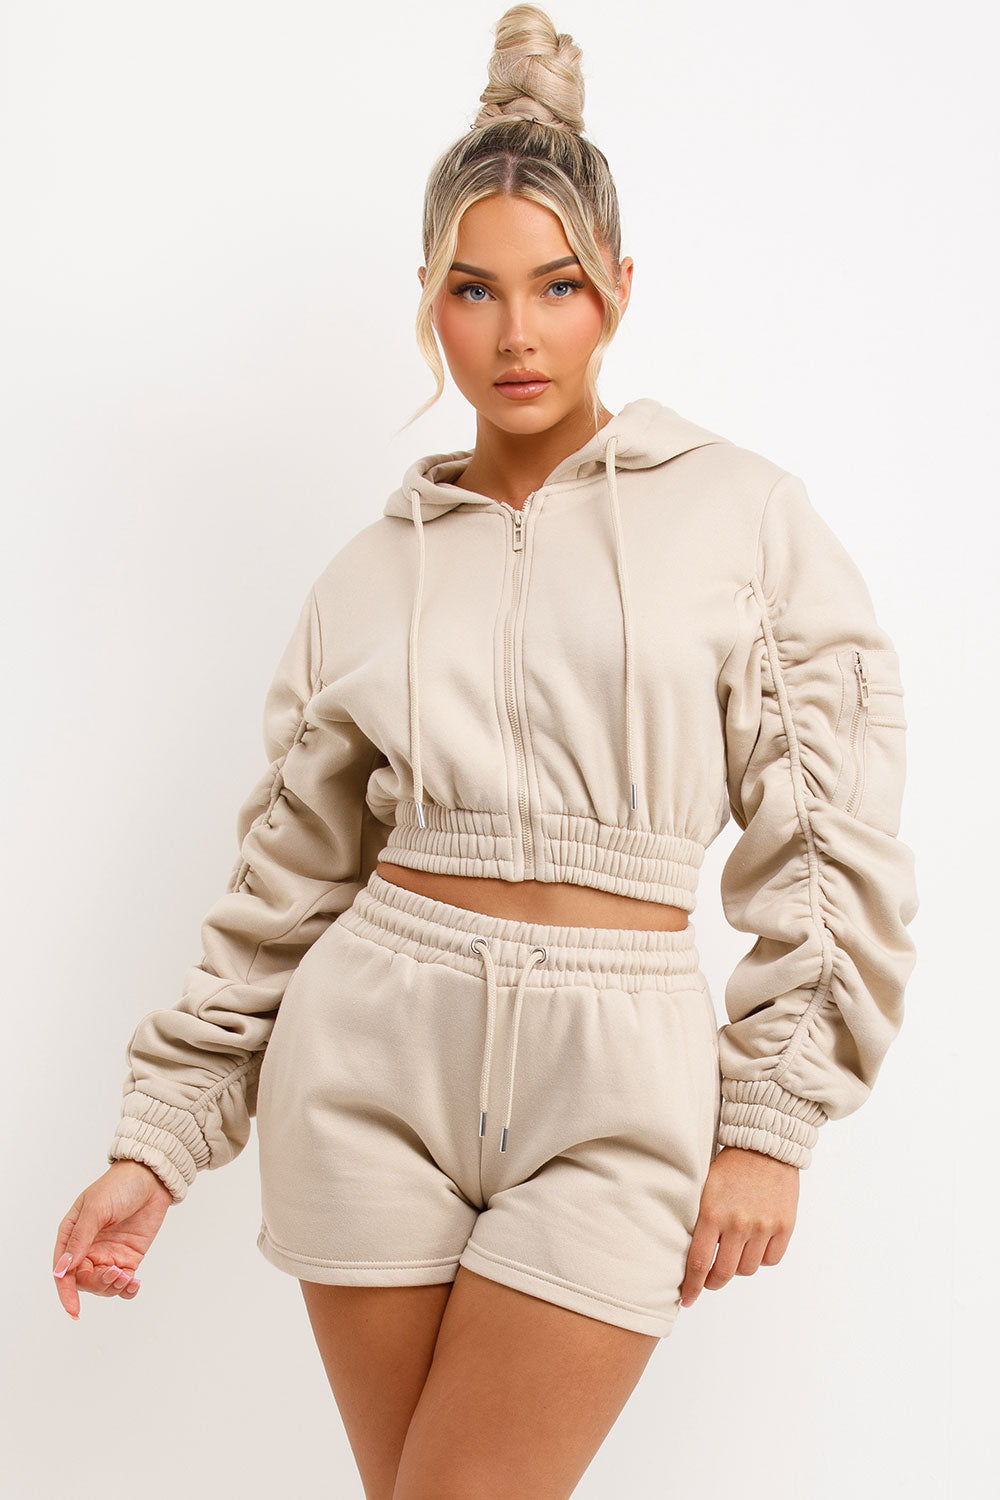 oatmeal crop zip hoodie with ruched sleeves and shorts tracksuit womens summer lounge set